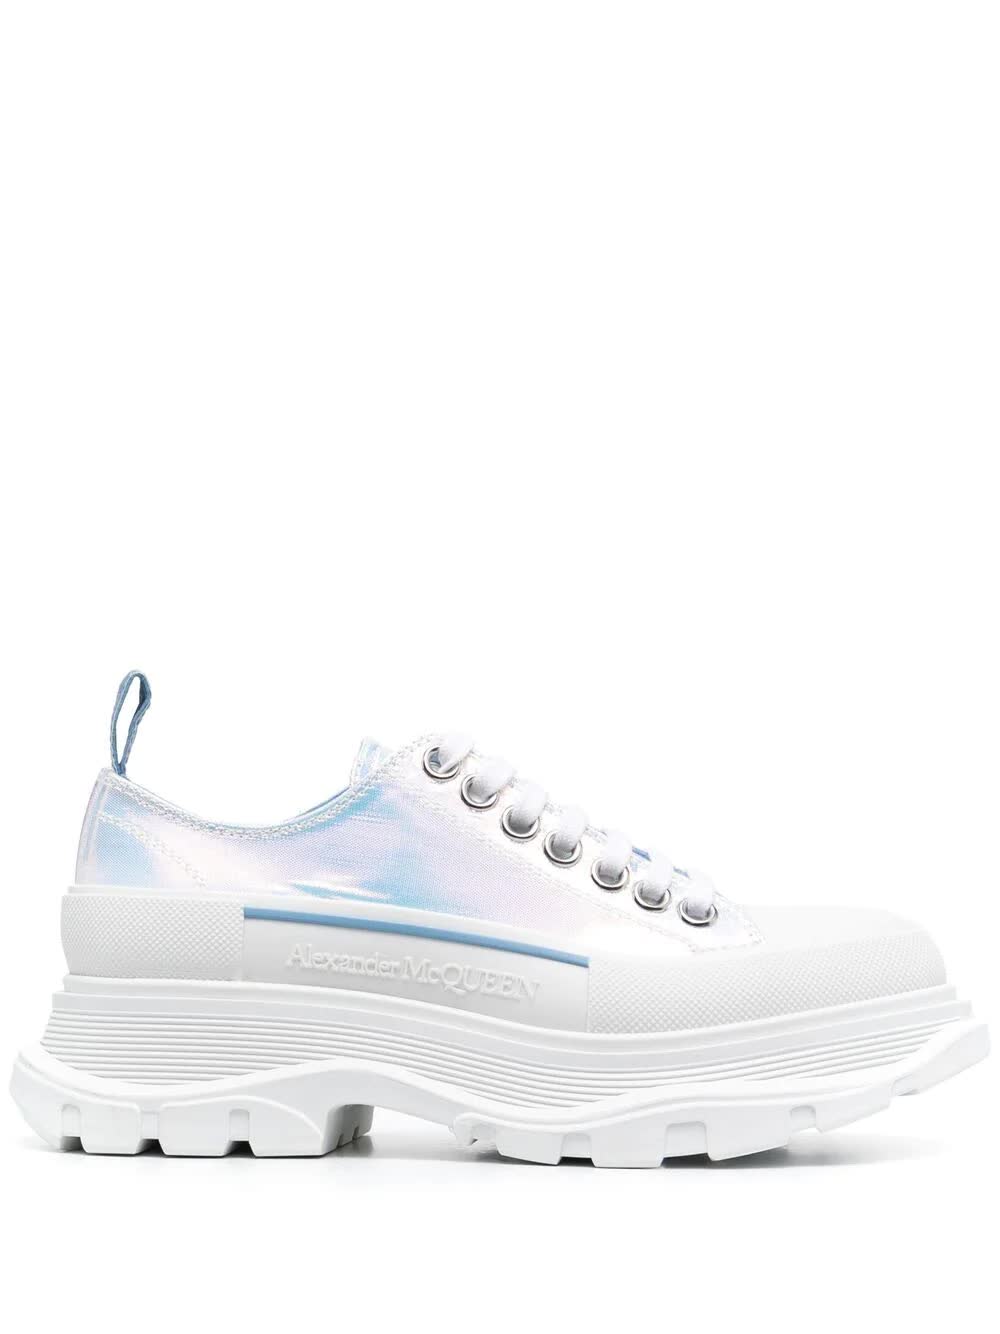 Buy Alexander McQueen Woman Iridescent Light Blue Tread Slick Lace-up Shoes online, shop Alexander McQueen shoes with free shipping